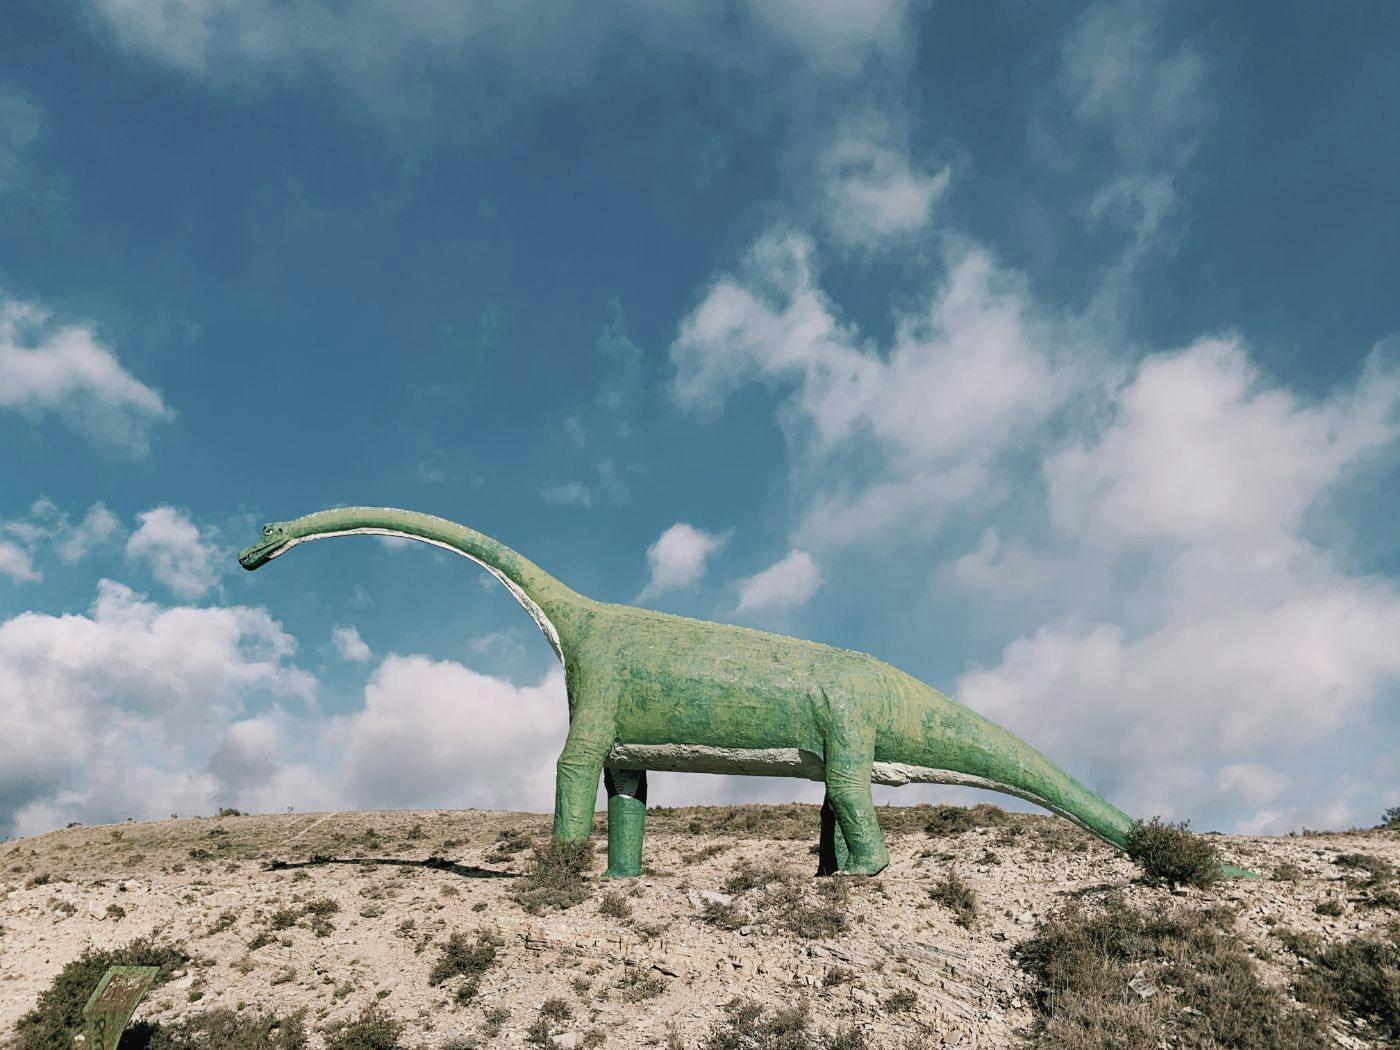 /why-a-dinosaur-statue-might-be-good-for-local-business-marketing-part-3 feature image